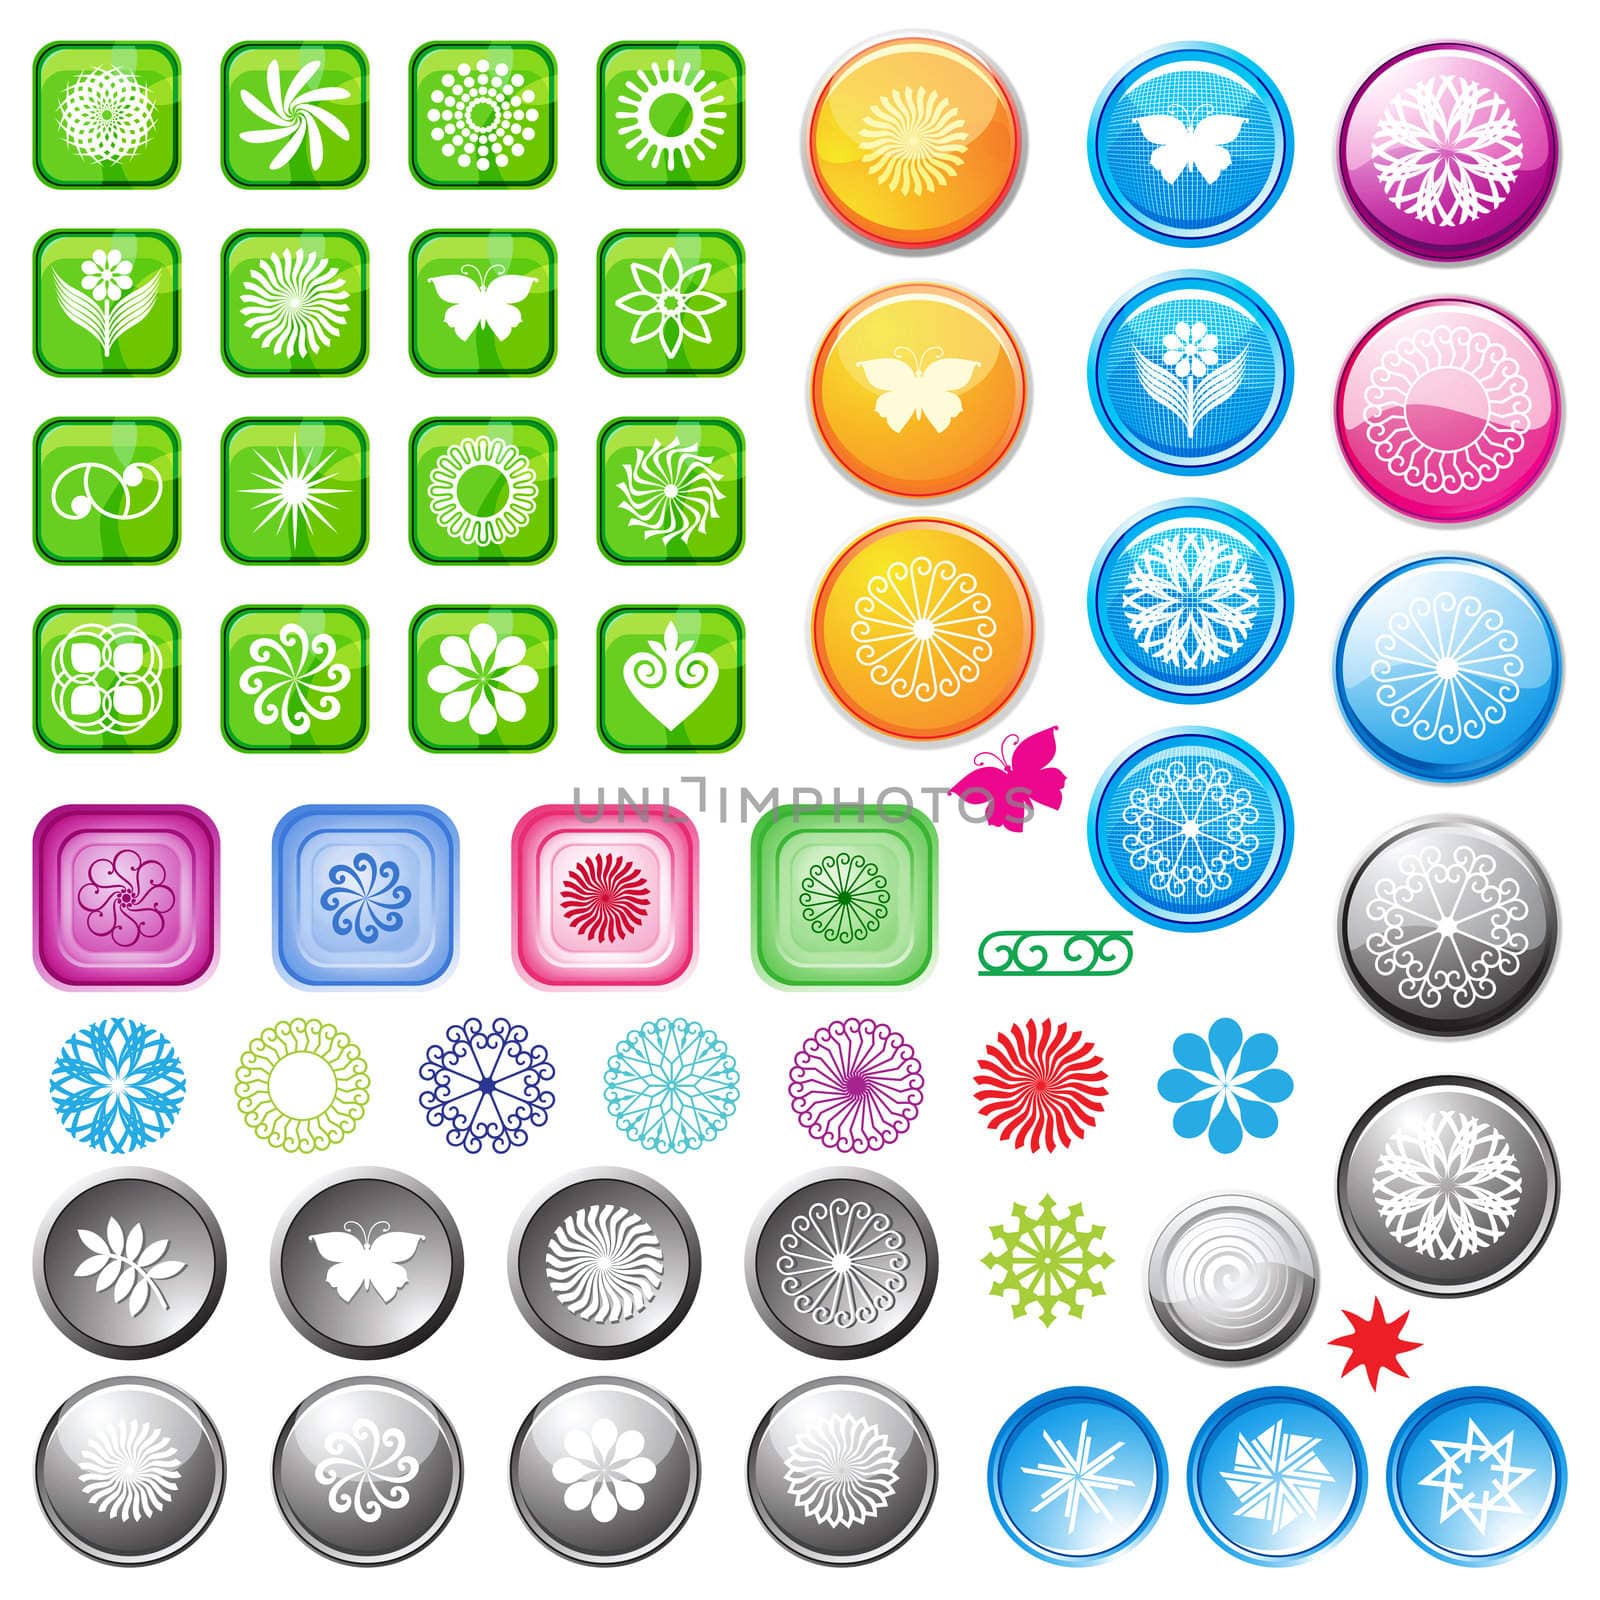 collection of button in varies colors at different circle